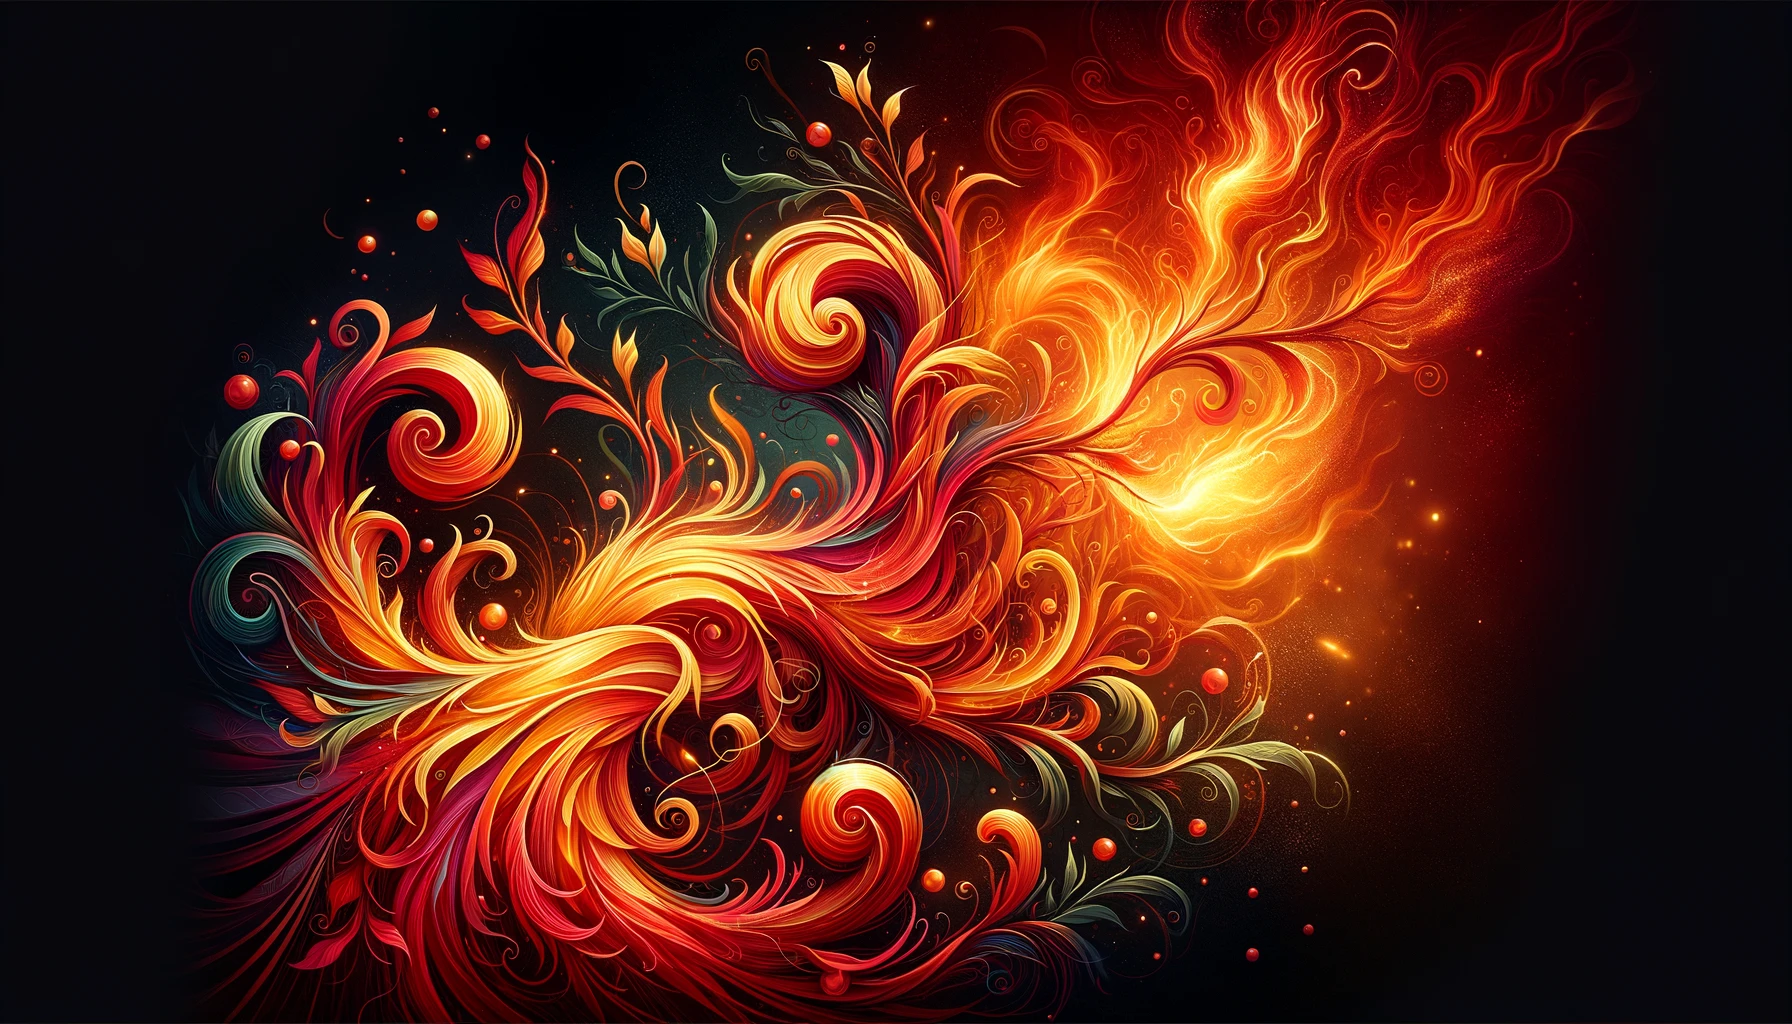 A dynamic and vibrant 169 image capturing the fiery energy and passion of the Wands suit in the Minor Arcana of tarot The image should depict swirling vivid flames intertwining with fl